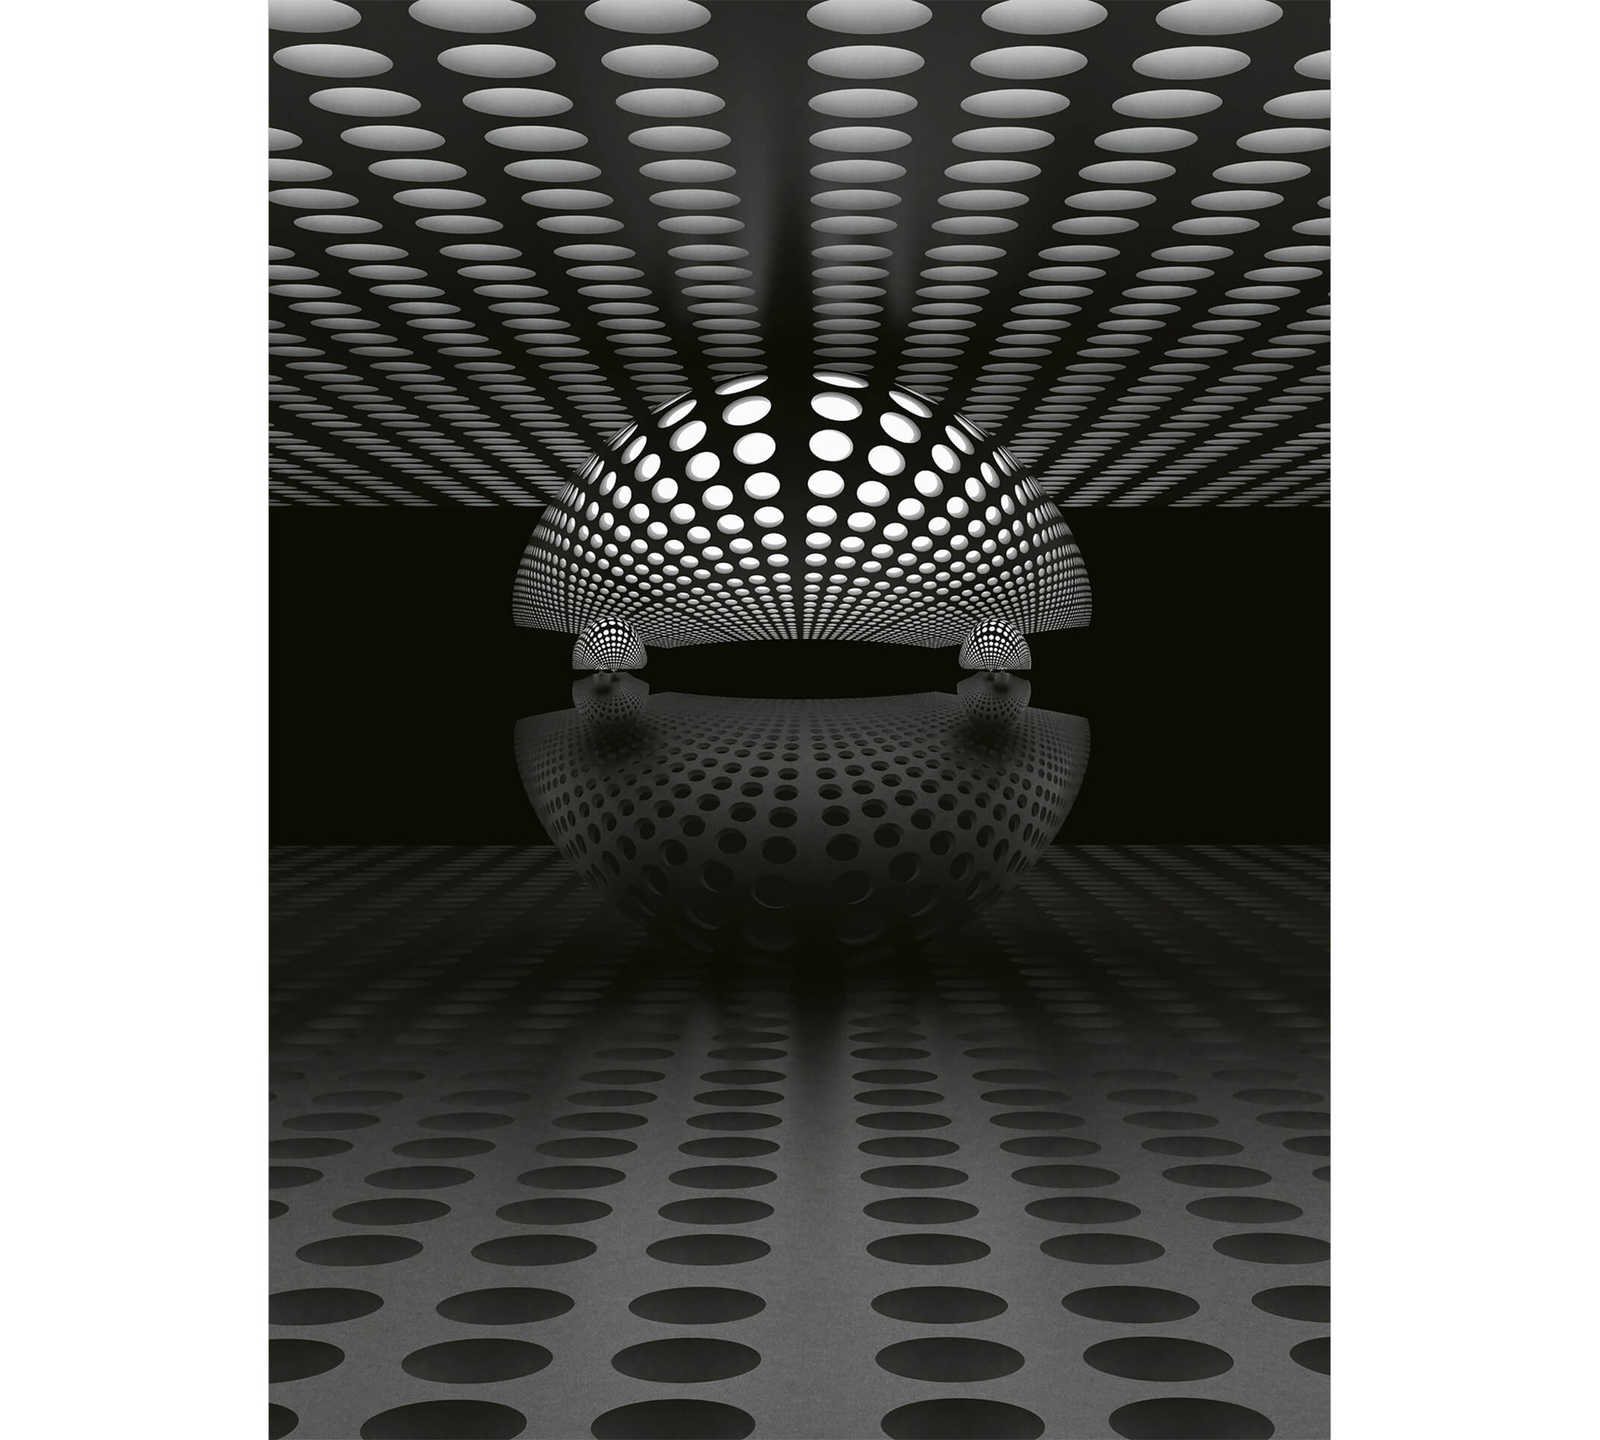 Photo wallpaper abstract 3D sphere - black, grey, white
